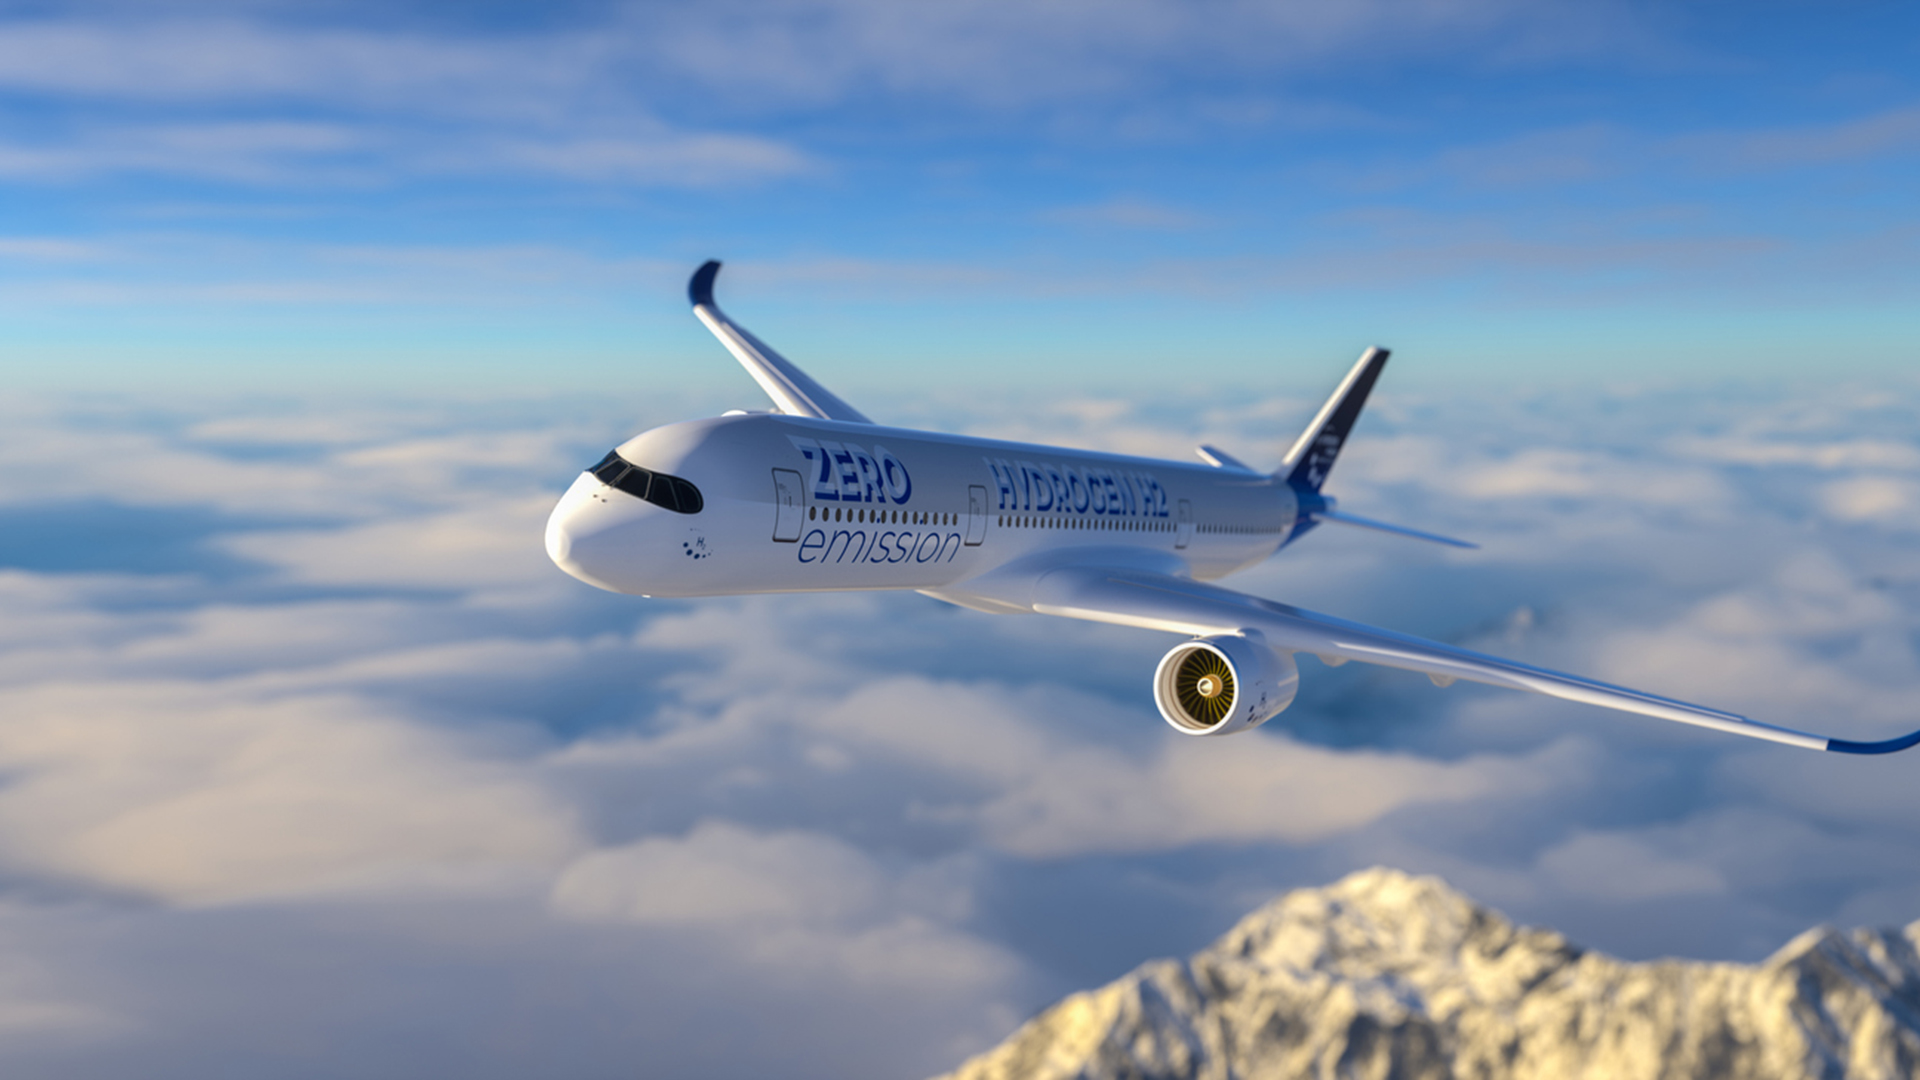 CERN and Airbus collaborate to develop zeroemission hydrogen planes